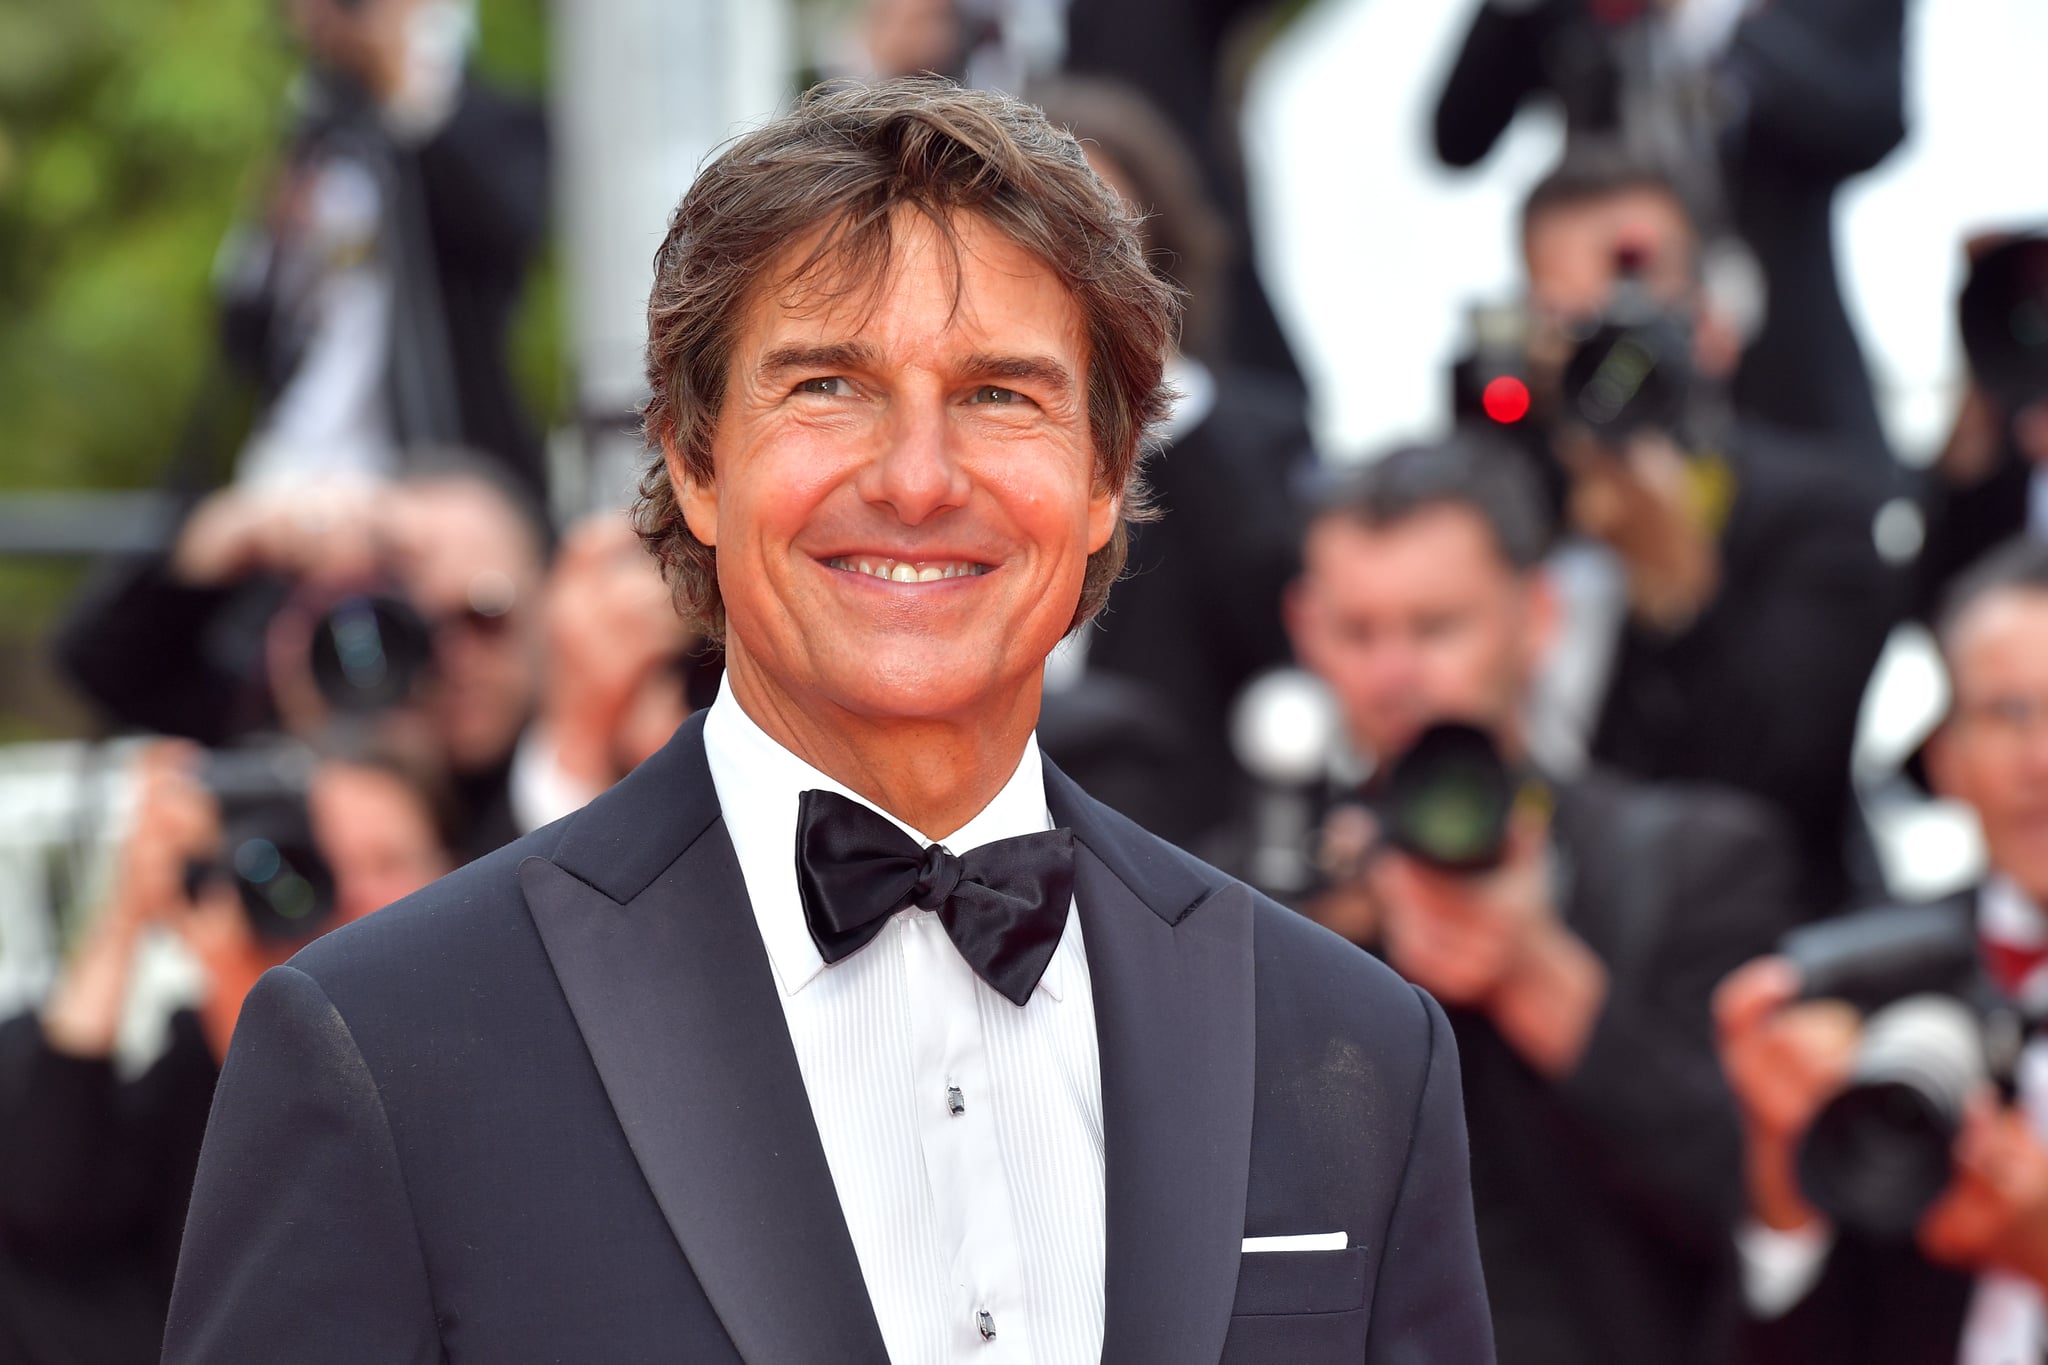 Tom Cruise Will Be the First Person to Perform a Spacewalk “Outside of the Space Station”